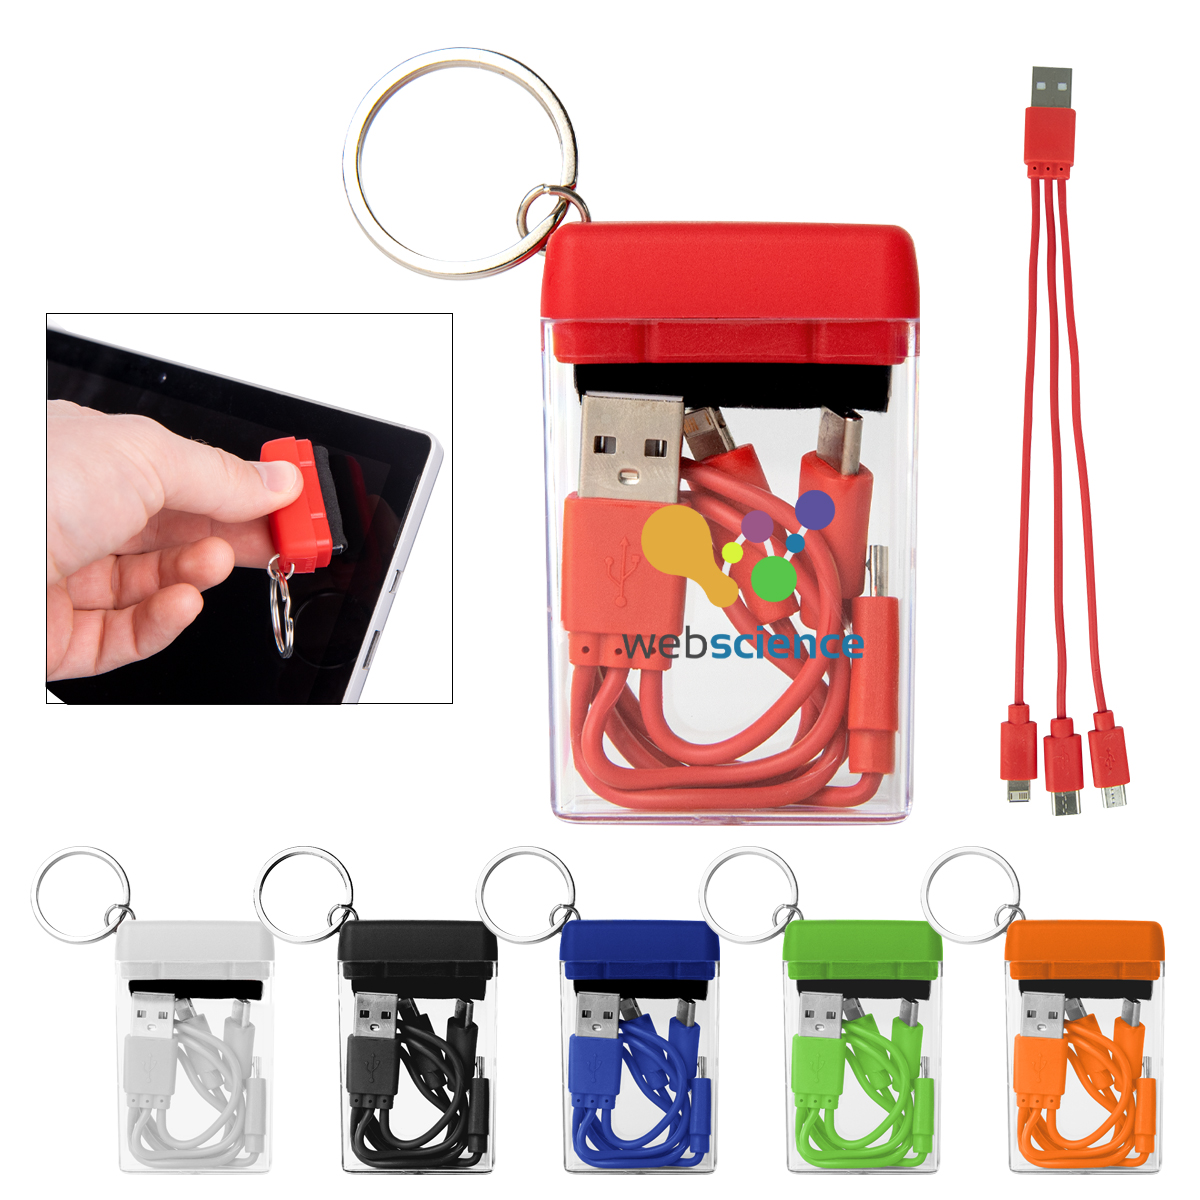 Pocket Charging Cable and Screen Cleaner with Keyring